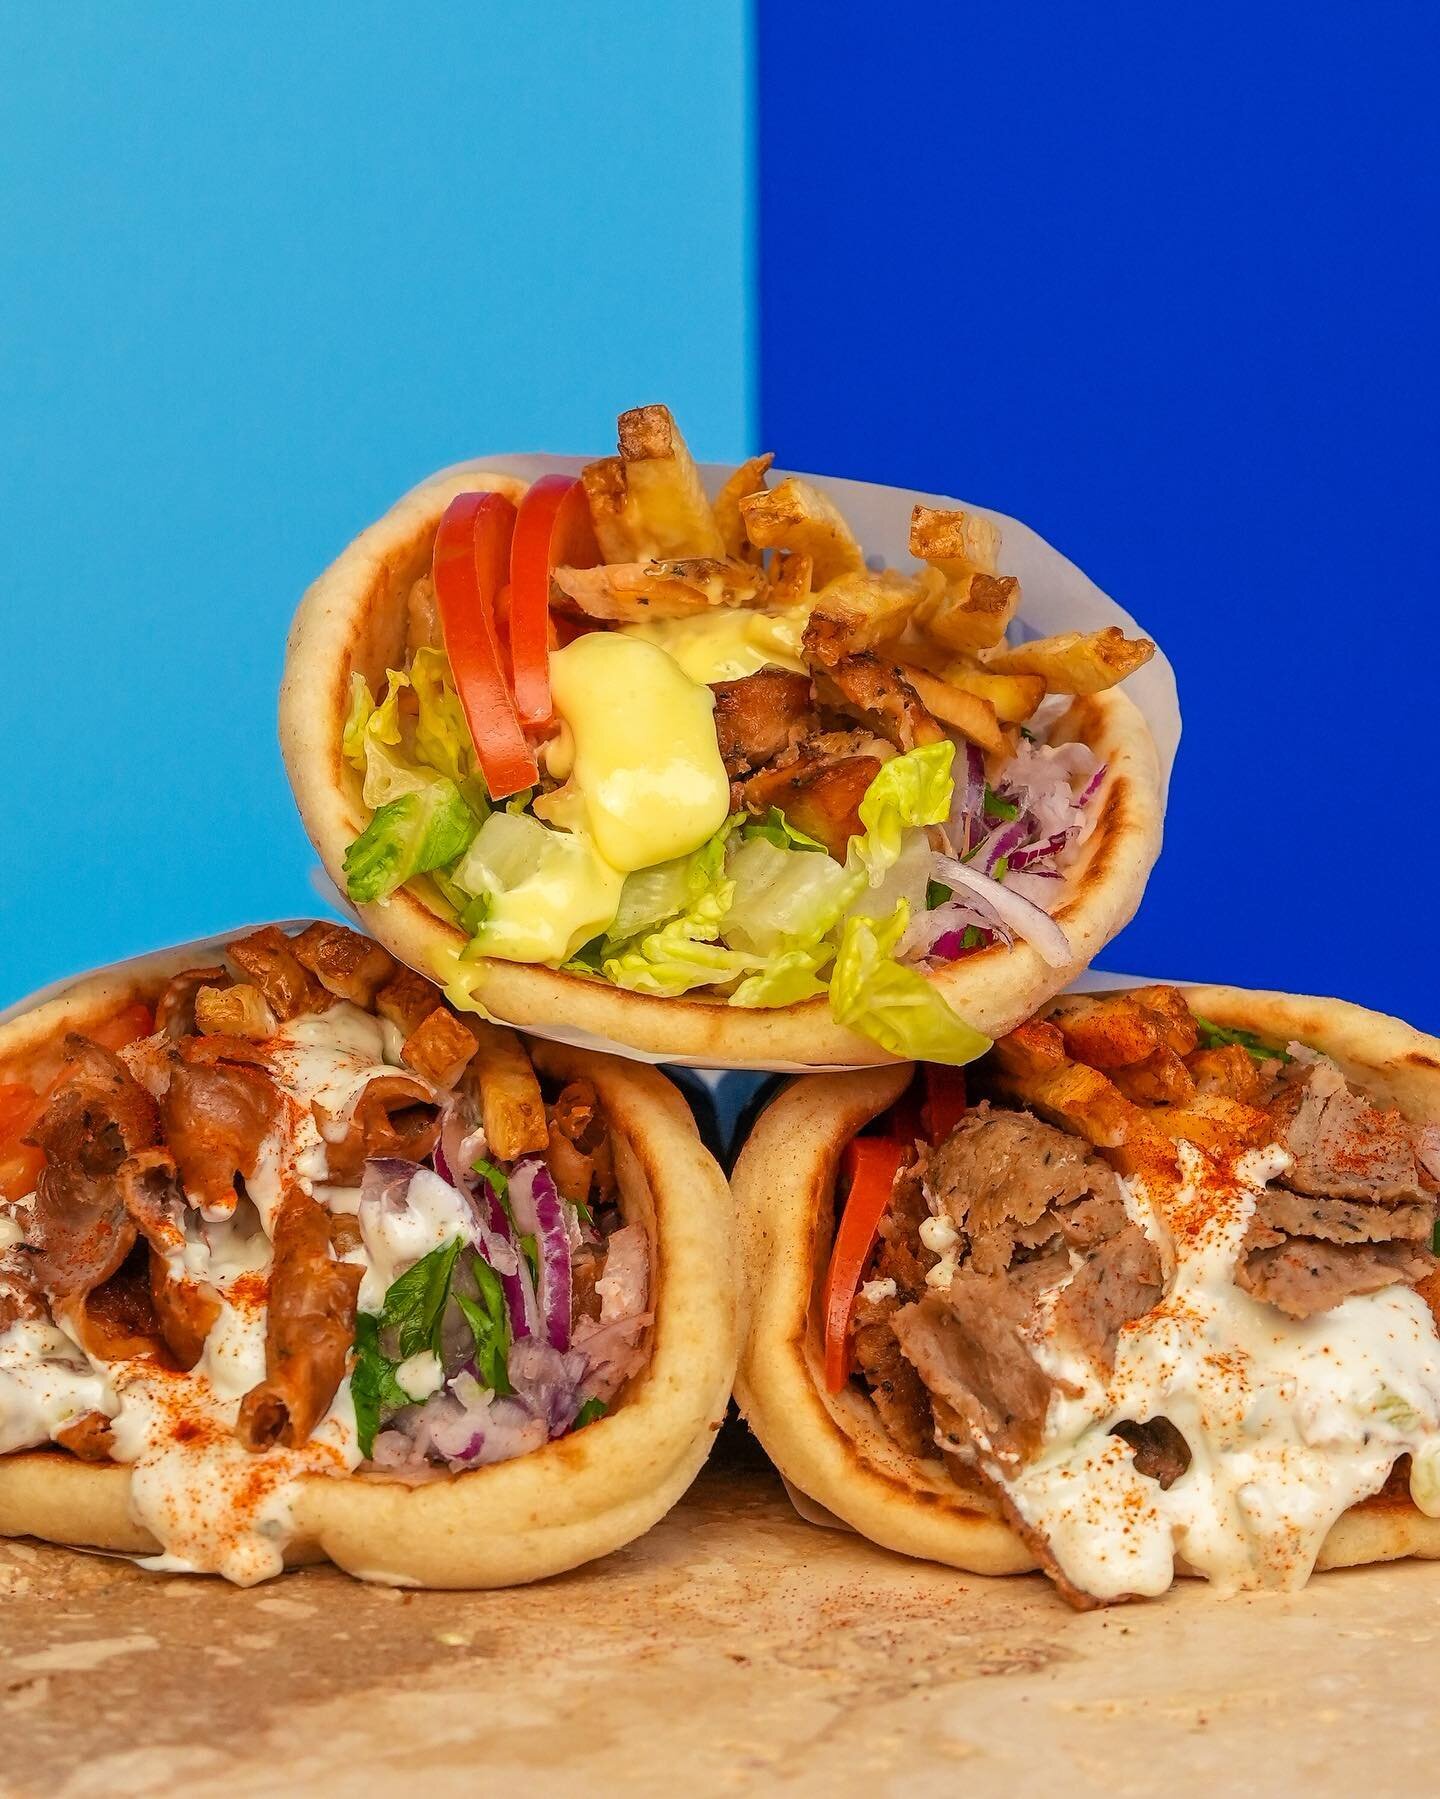 The Great Pyramids of Gyro are calling and we must answer. Come try one yourself and experience their historically good flavors!

-

#Gryos #Greekfood #Mediterranean #Delicious